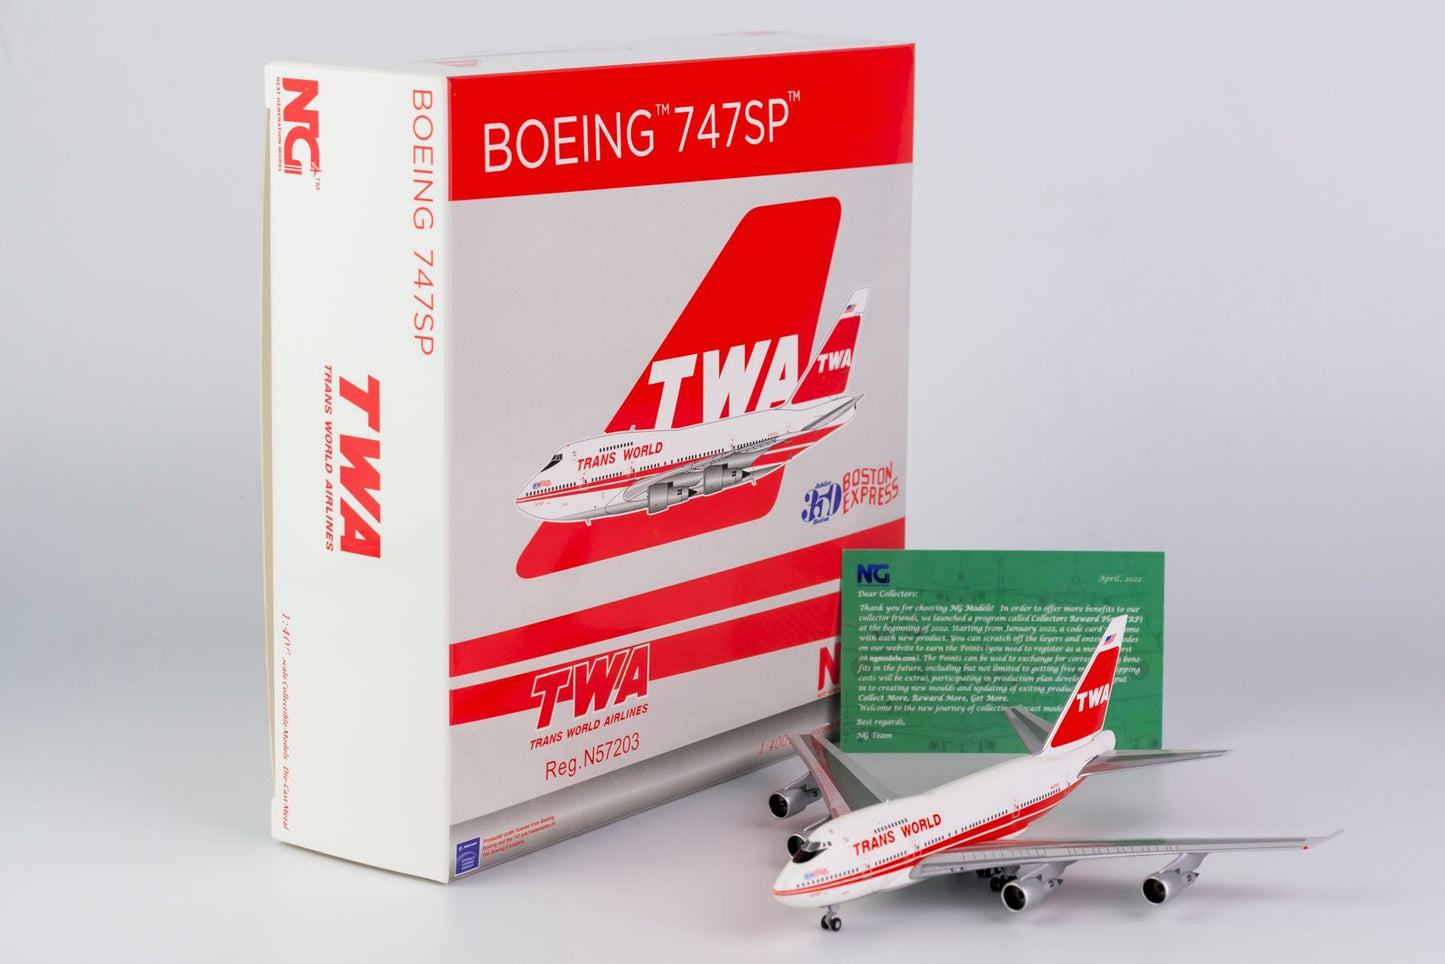 1:400 NG Models Trans World Airlines (TWA) Boeing 747SP "Twin Stripes, Boston Express" N57203 07020